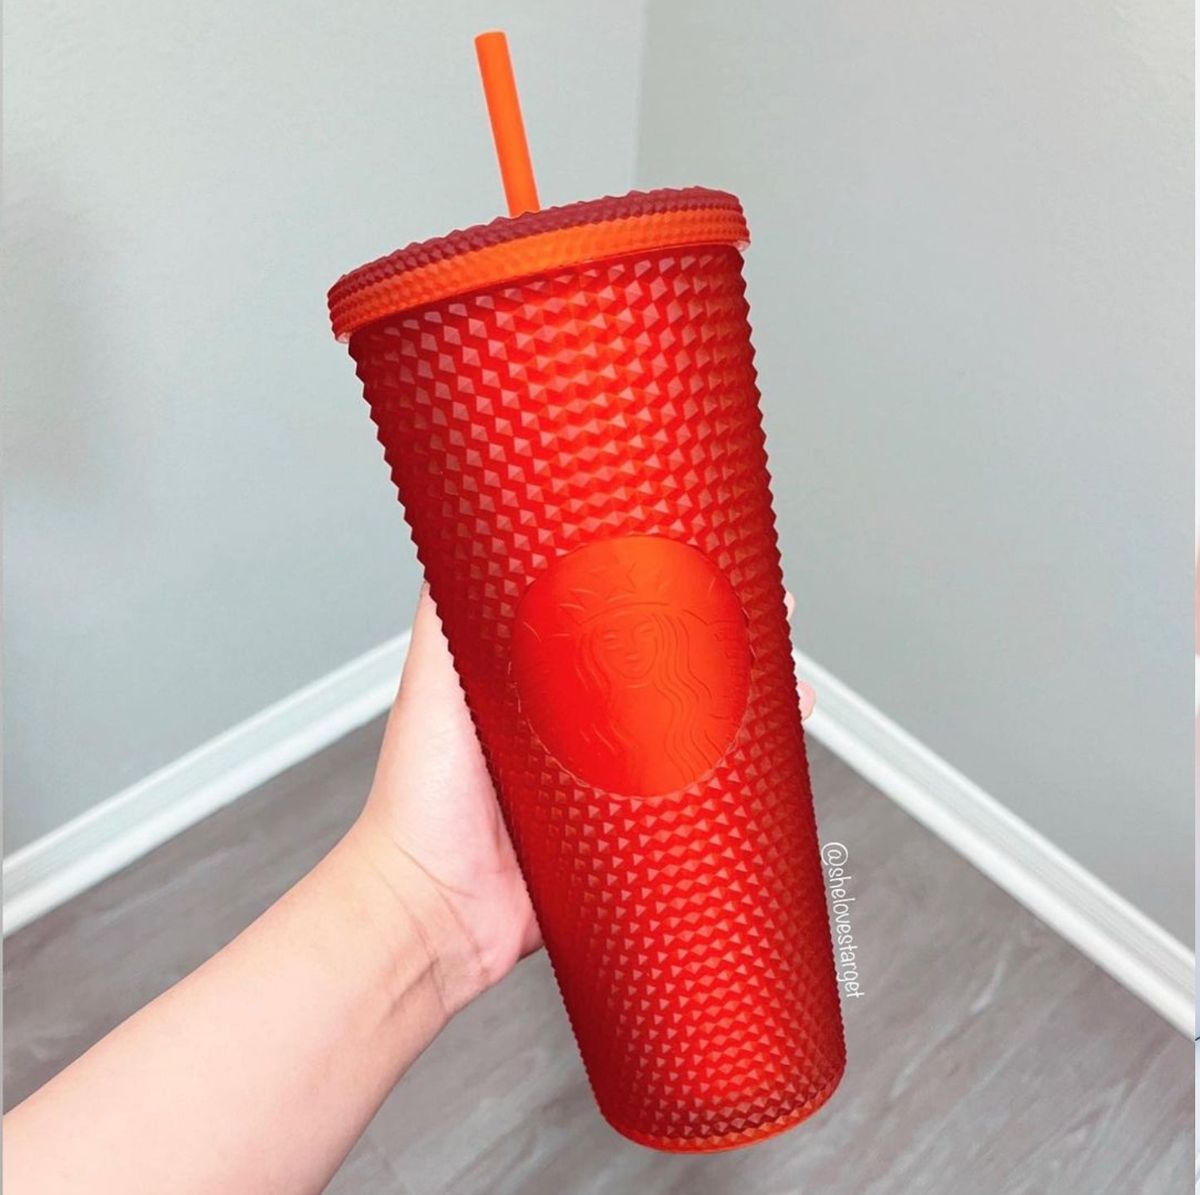 https://hips.hearstapps.com/hmg-prod/images/starbucks-coral-matte-studded-cup-1605729485.jpg?crop=0.502xw:1.00xh;0,0&resize=1200:*